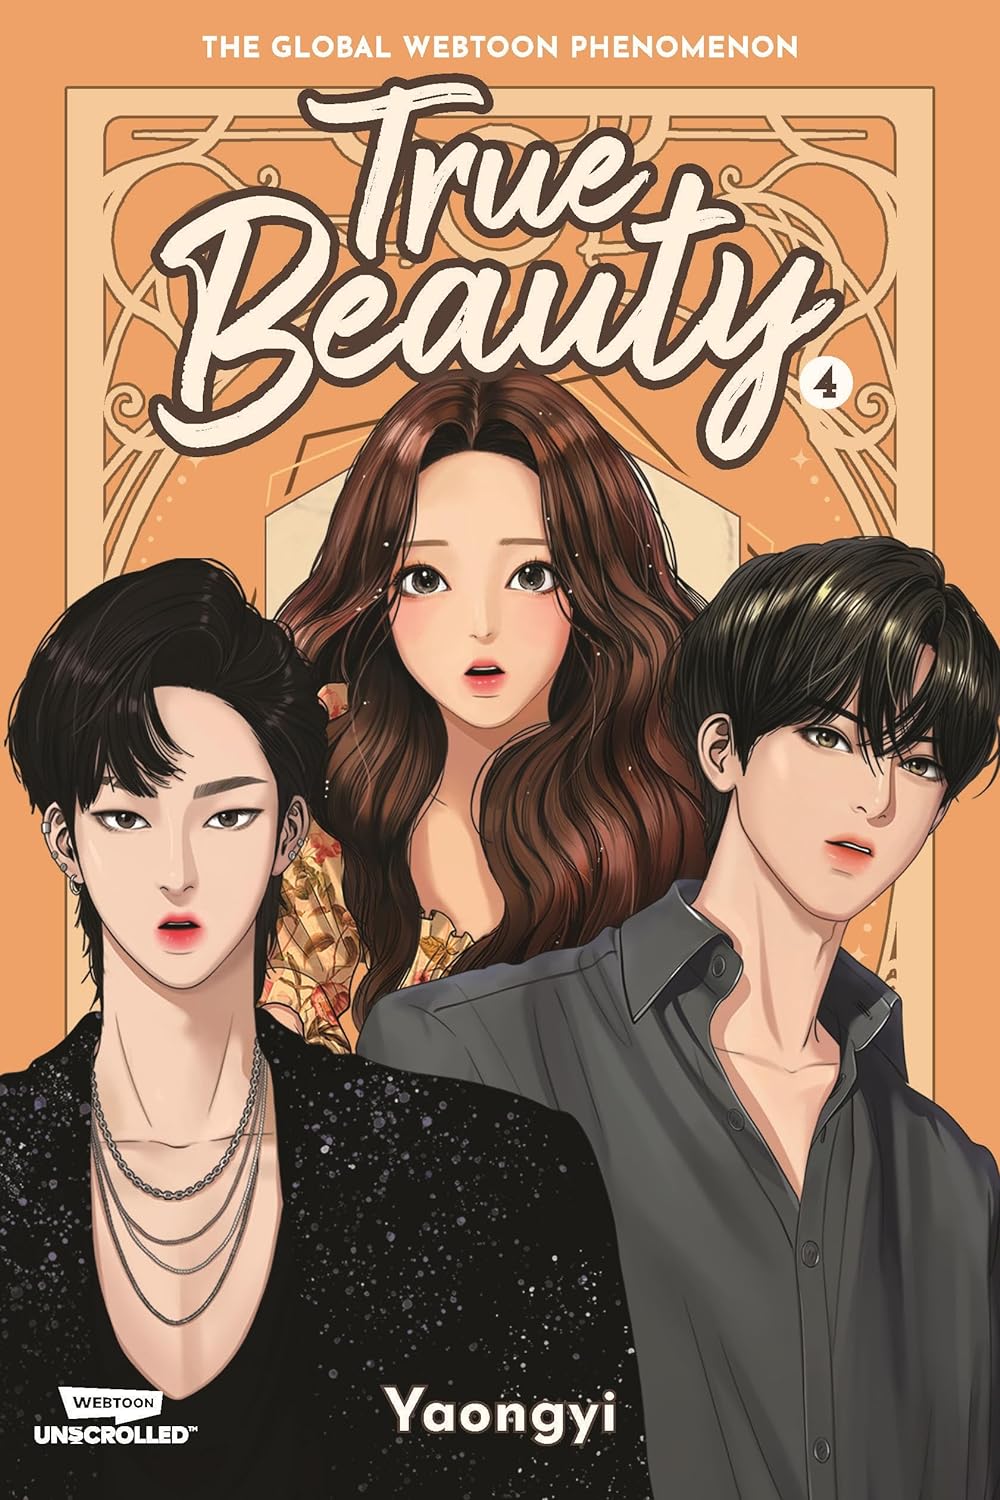 “True Beauty” is a popular Korean comic that recently got its own equally popular K-drama series